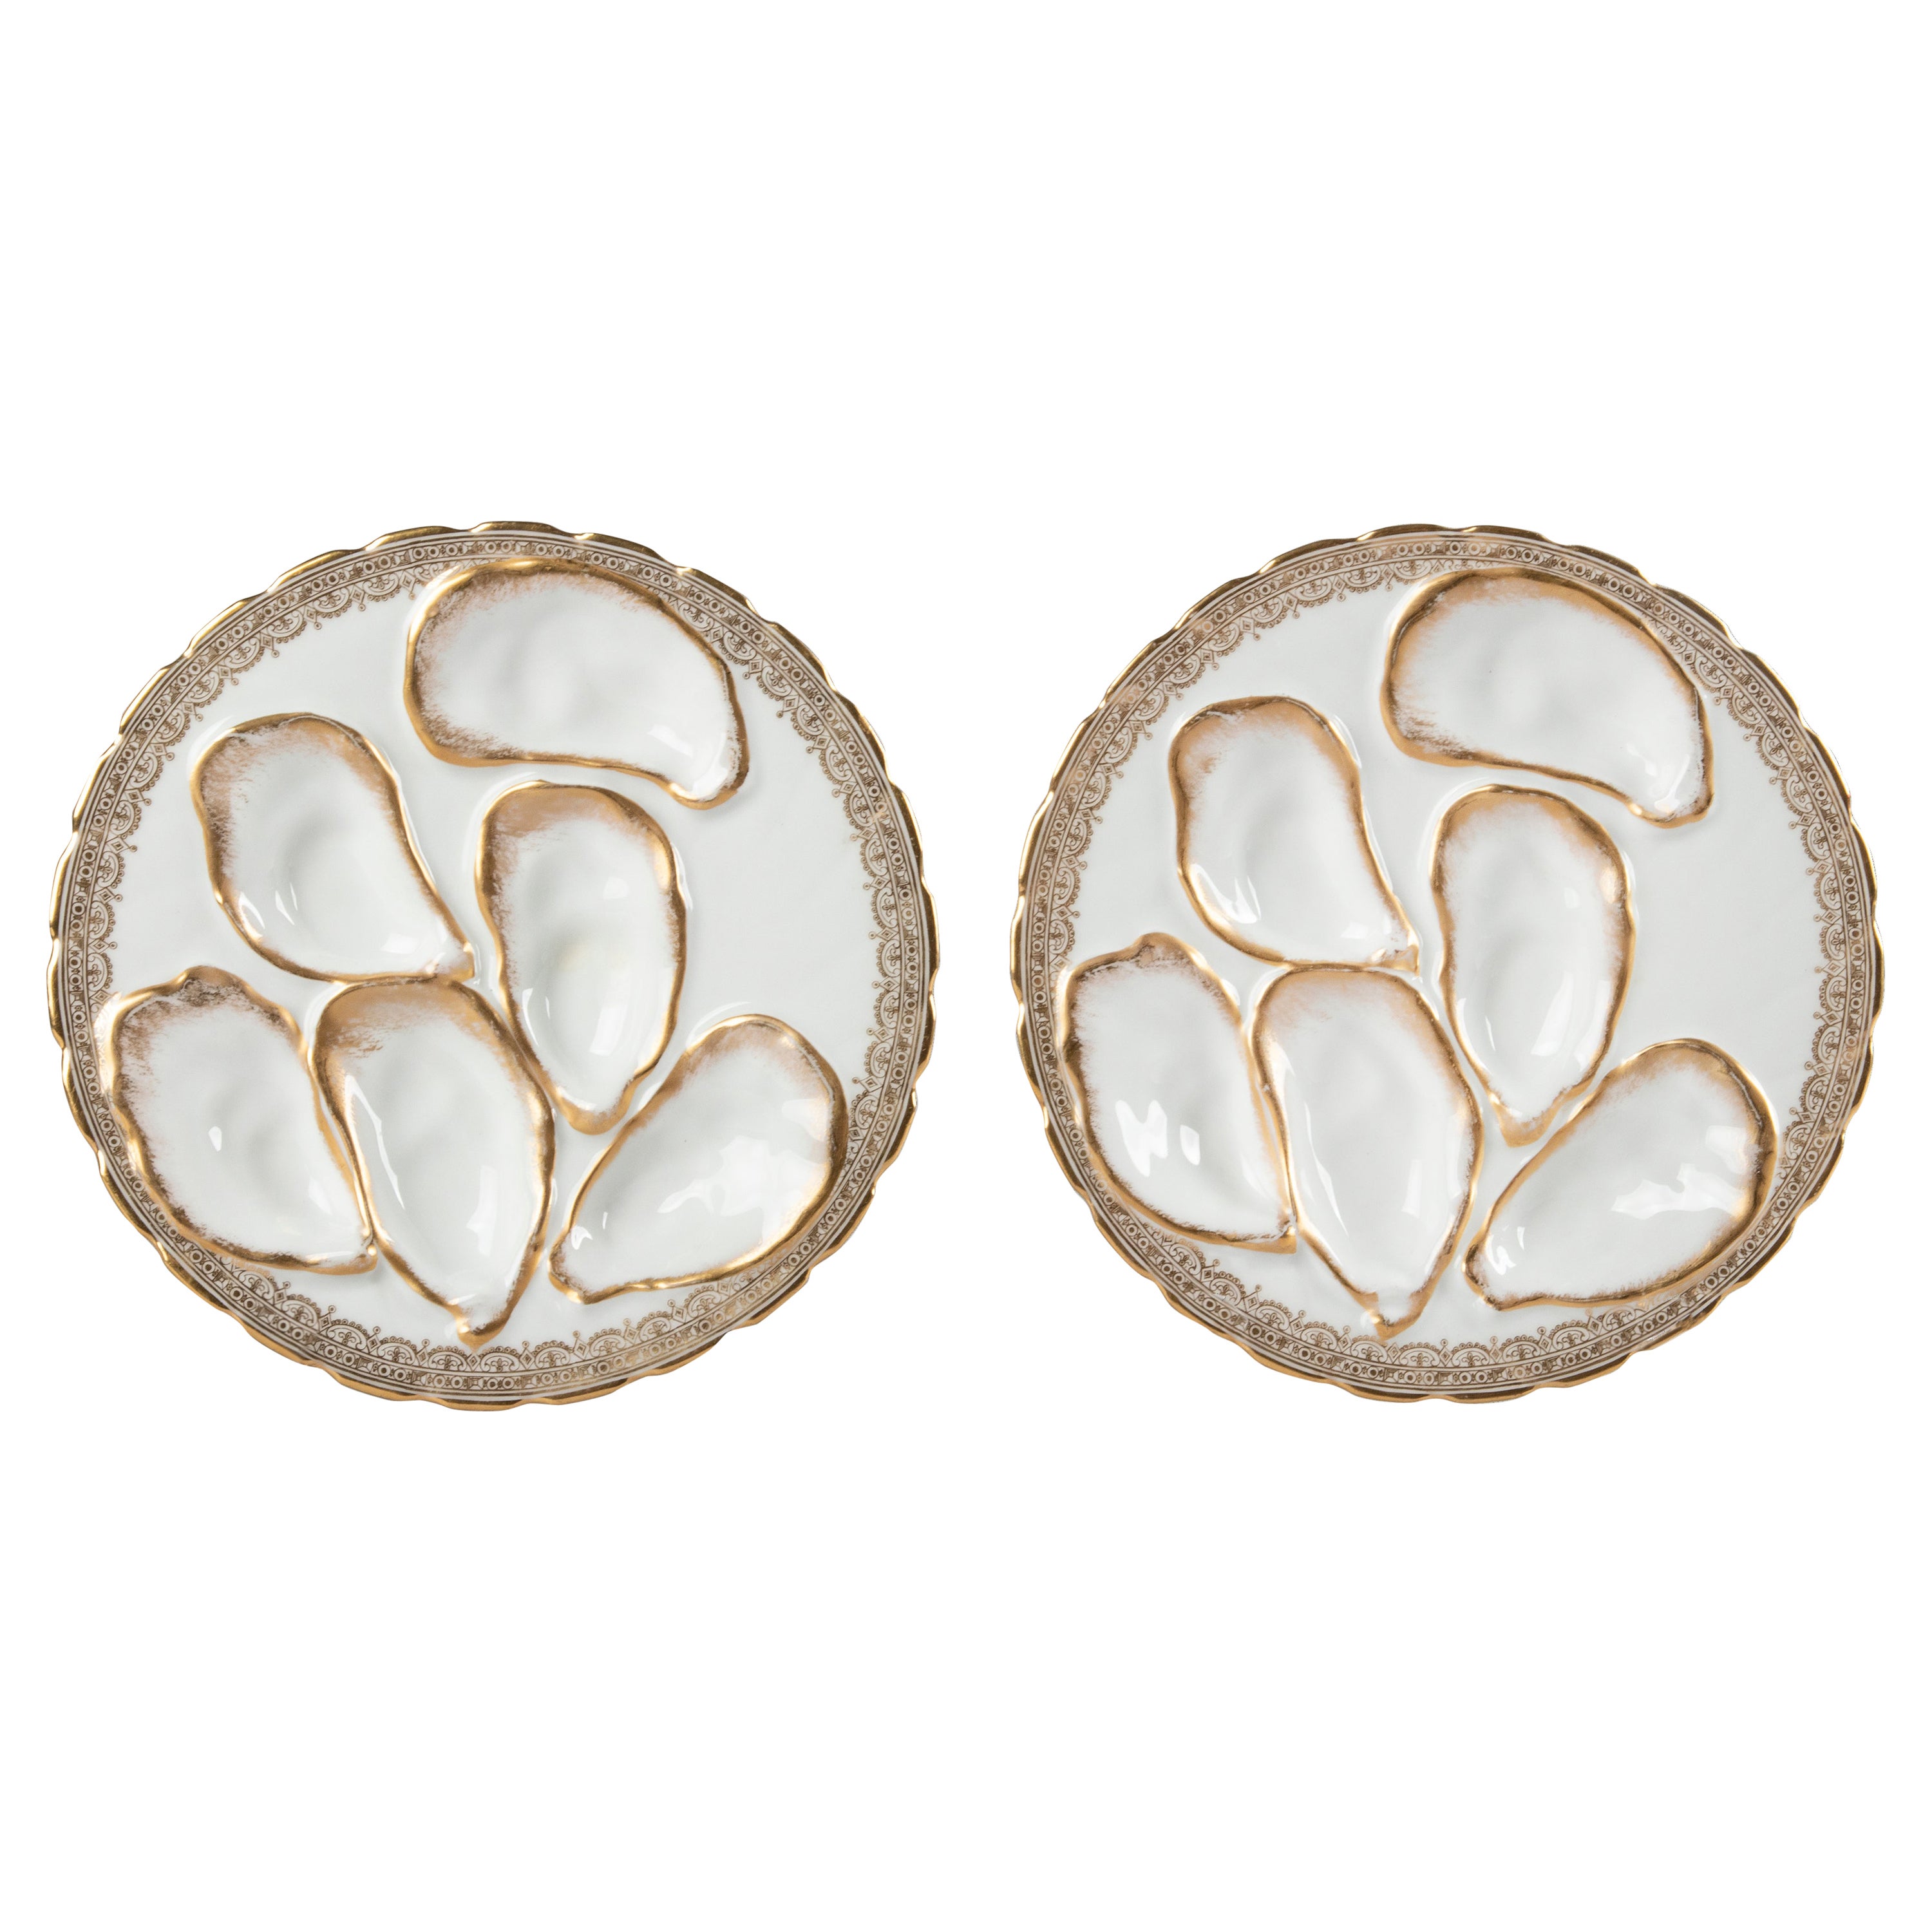 Two 19th Century Porcelain Oyster Plates by Haviland Limoges